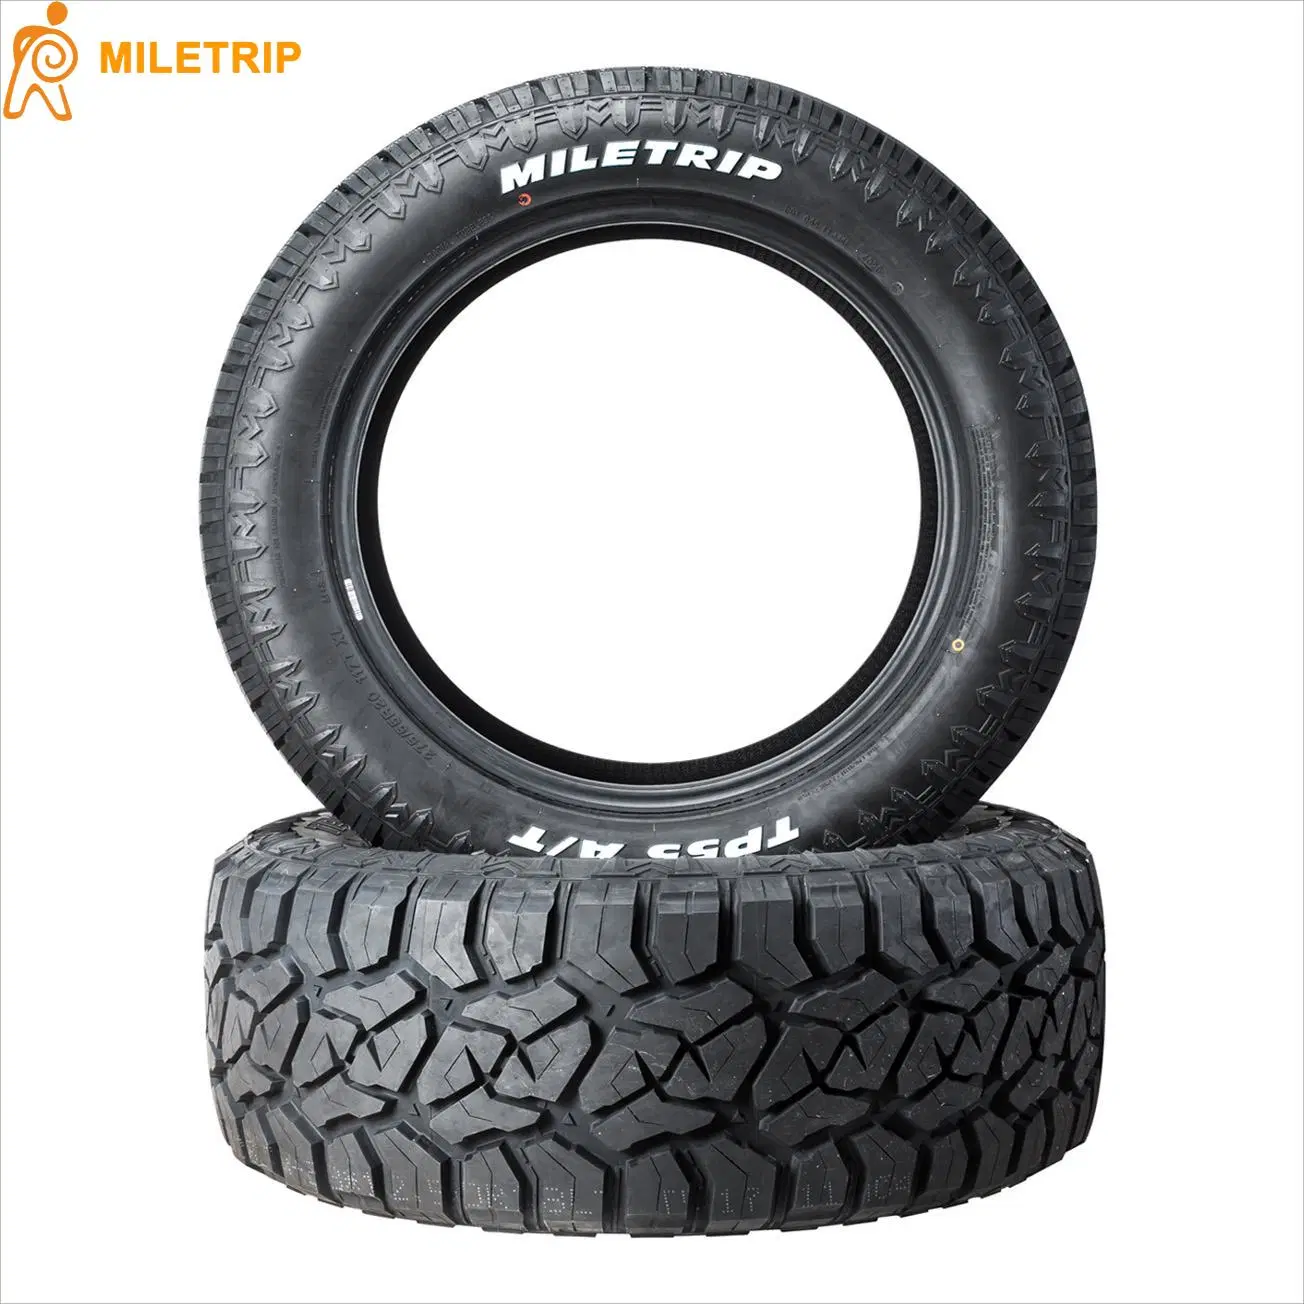 MILETRIP BRAND OFF ROAD 4X4 TIRE ALL TERRAIN R/T M/T LT235/85R16 120/116S 33*12.50R22LT 114Q LIGHT TRUCK PICK-UP FOR FORD Car Passenger Car with discount Tyres